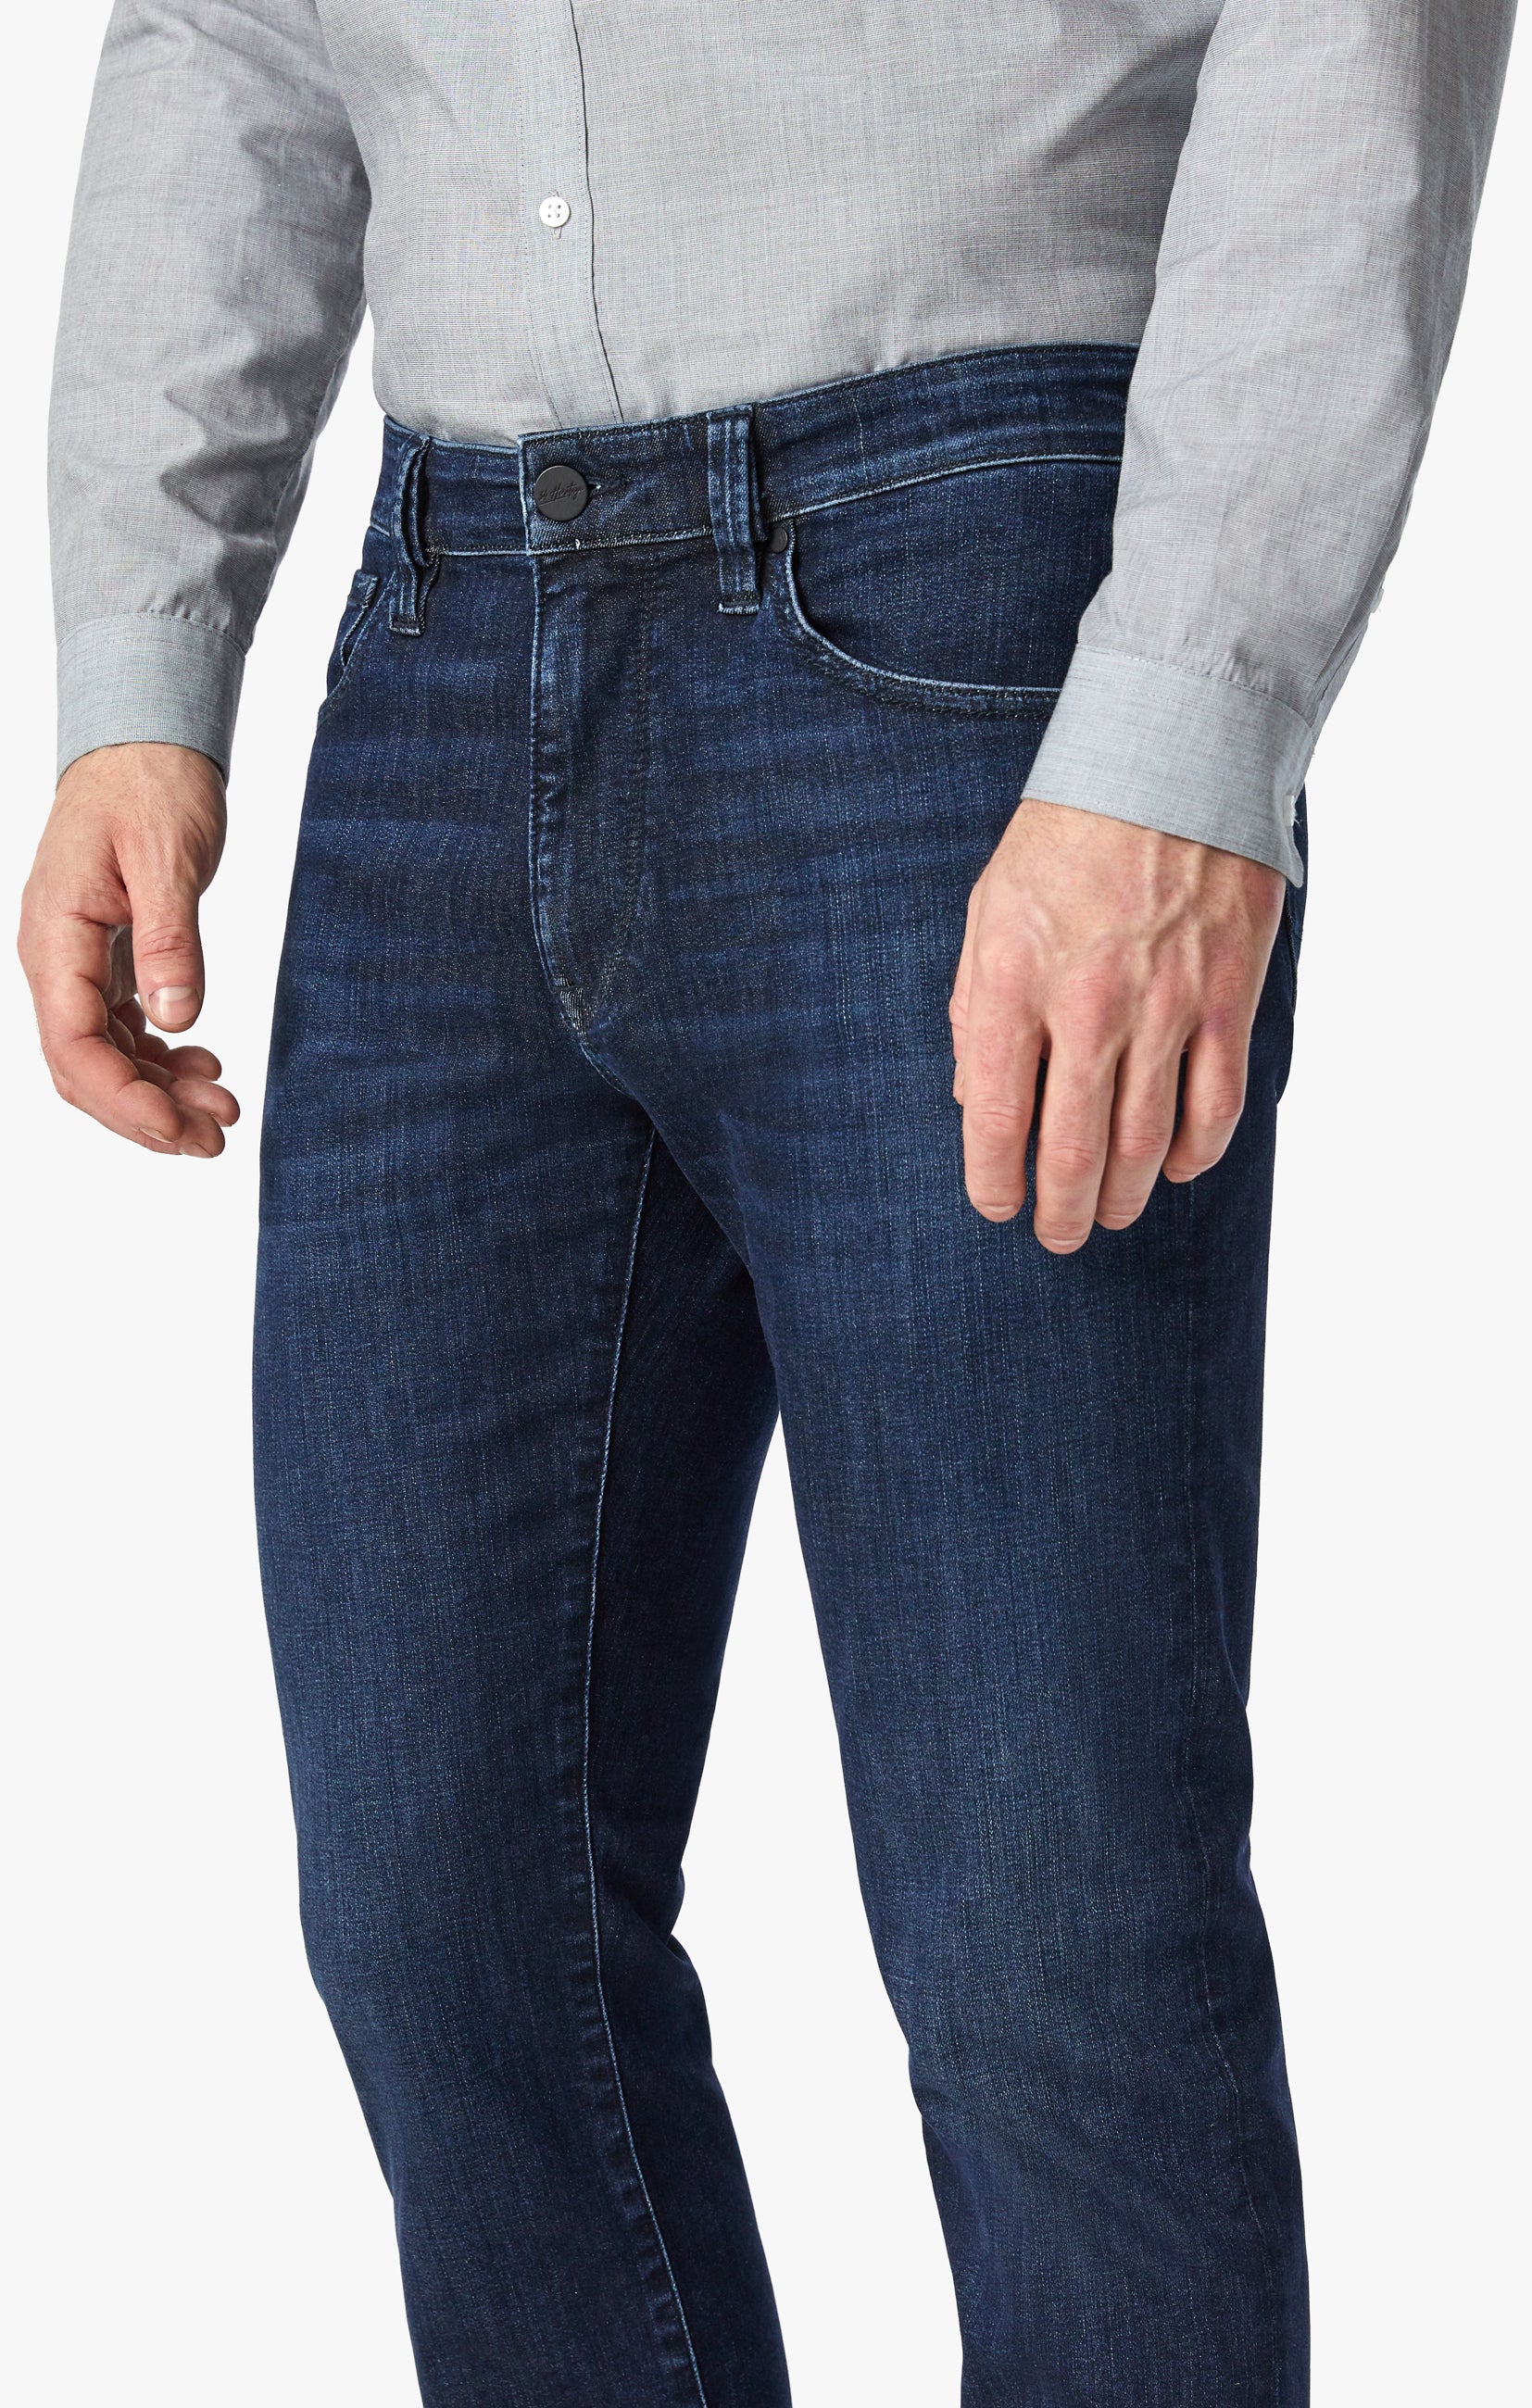 Charisma Relaxed Straight Jeans in Dark Urban Image 5